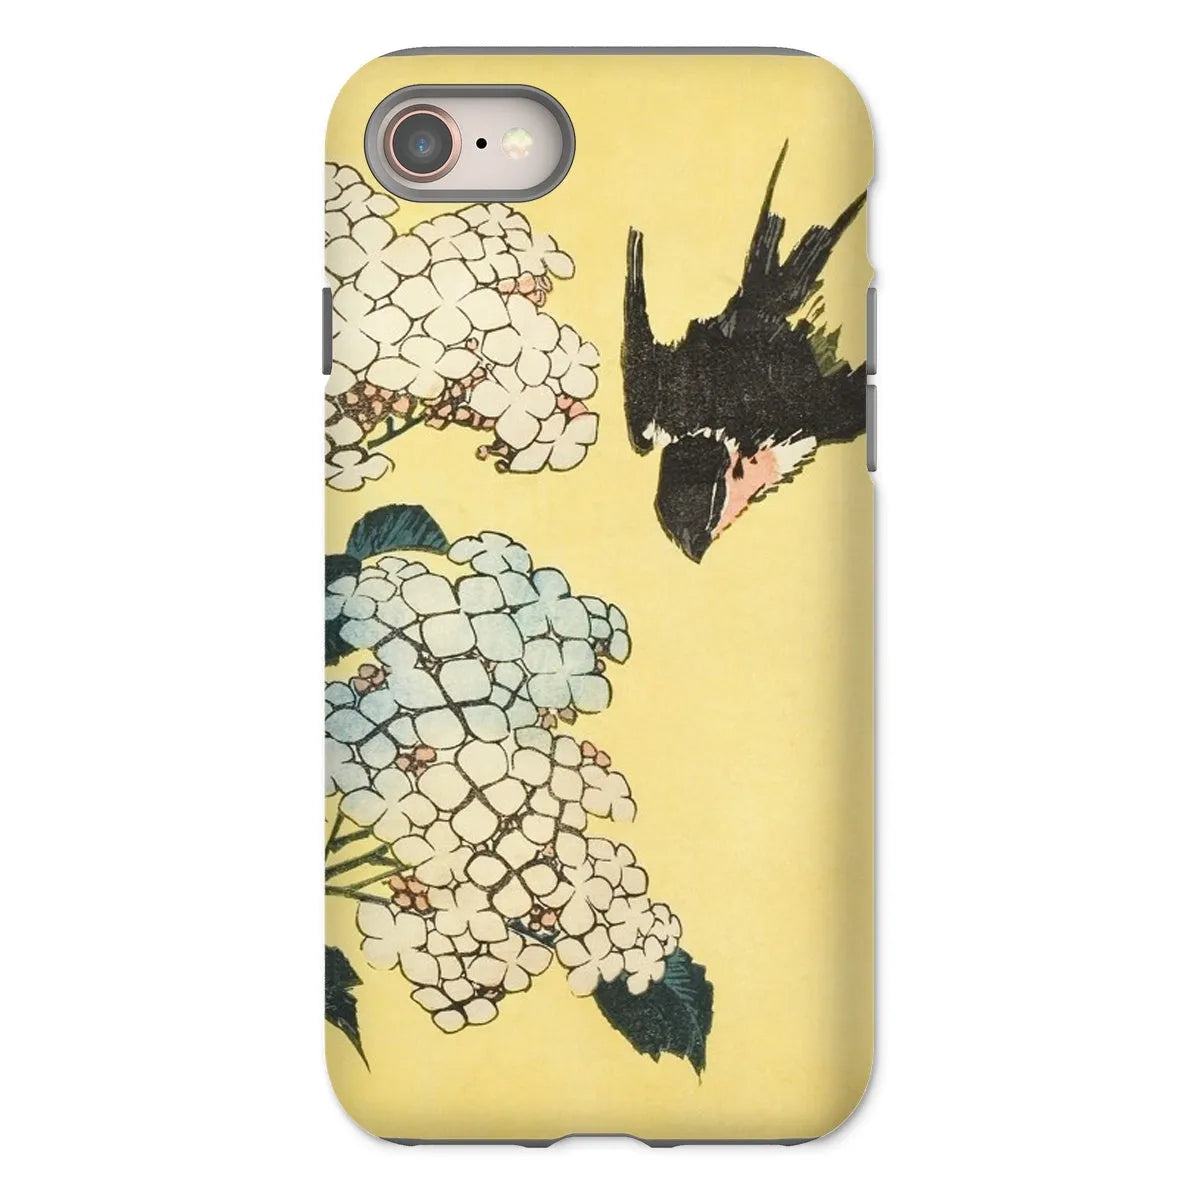 Hydrangea And Swallow - Japanese Art Phone Case - Hokusai - Iphone 8 / Matte - Mobile Phone Cases - Aesthetic Art